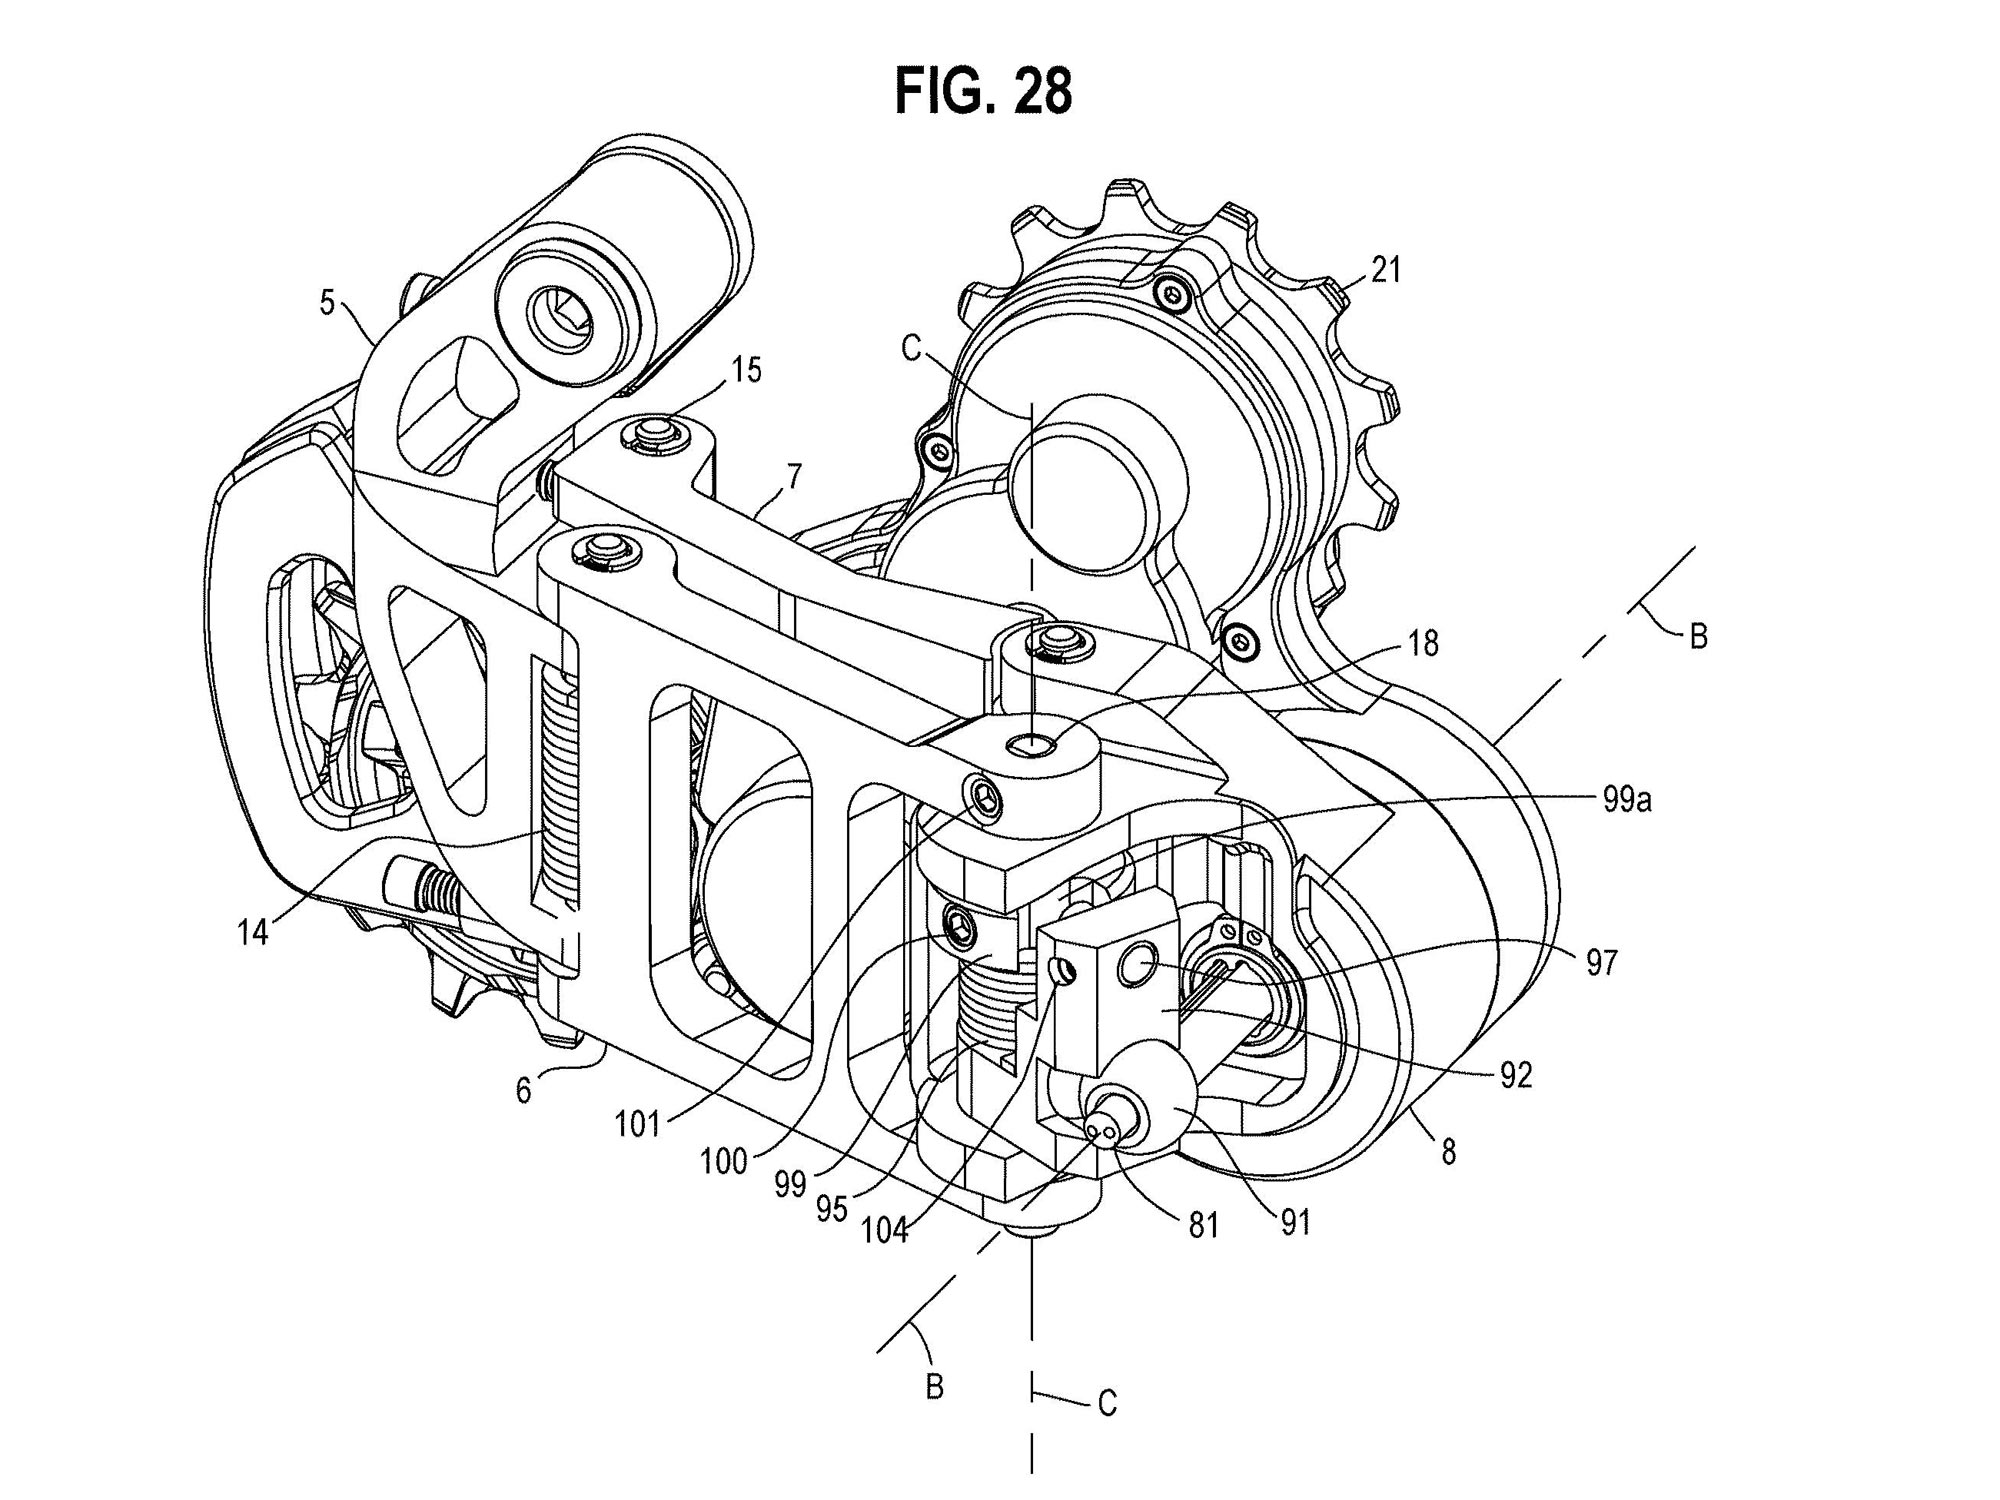 sram self-charging auto-shifting rear derailleur patent energy-harvesting system cage-housed motor shifter mechanism